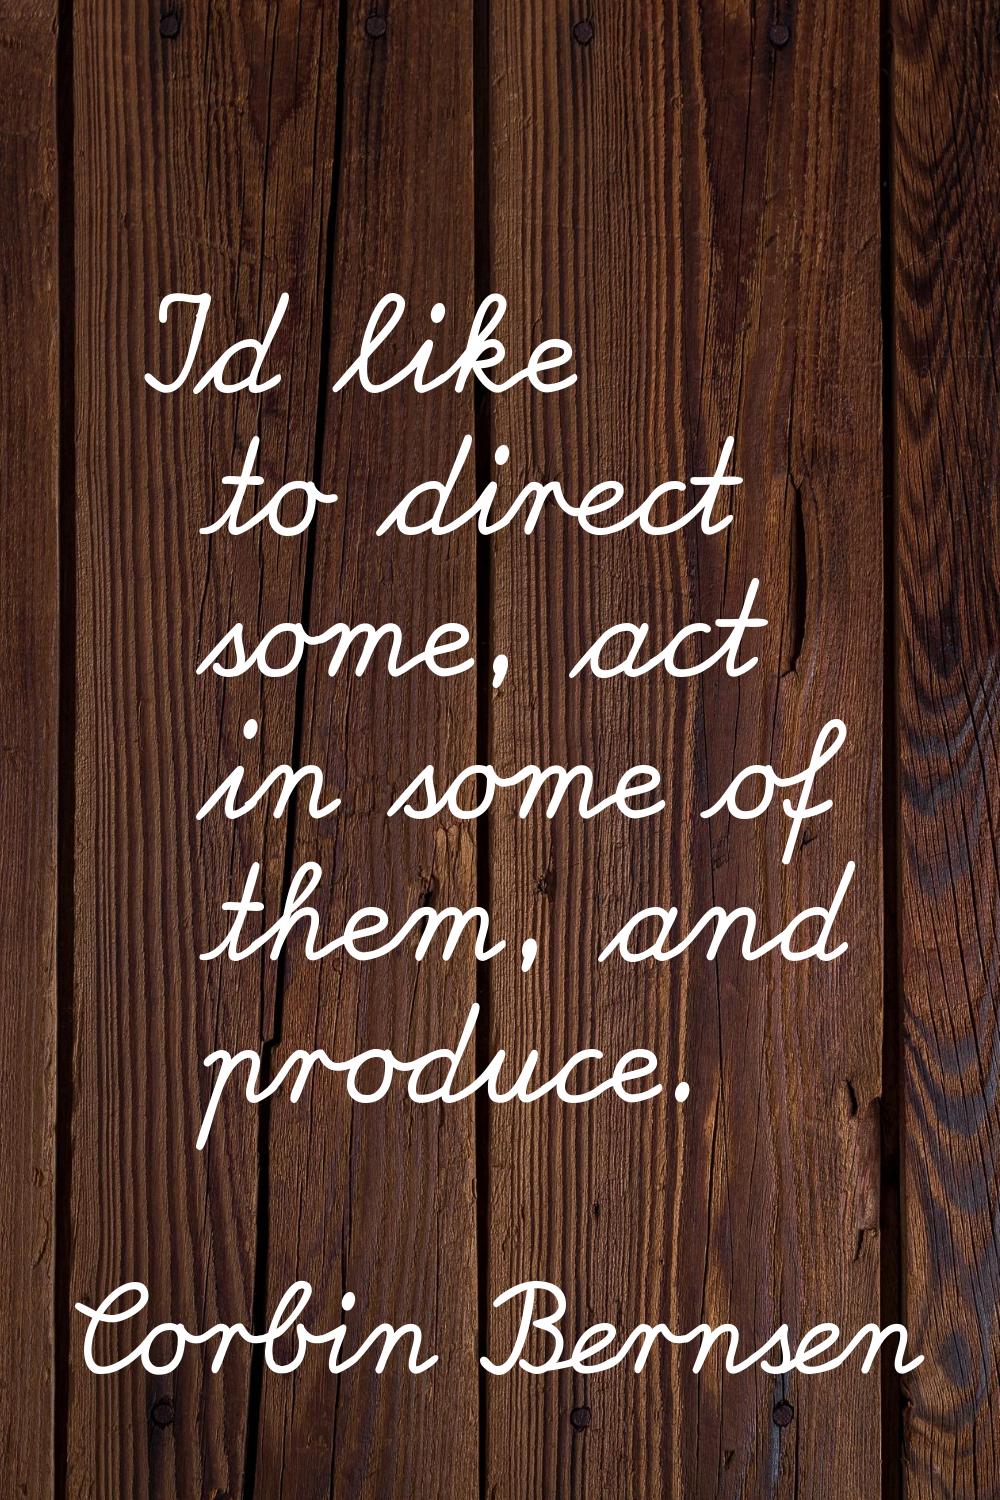 I'd like to direct some, act in some of them, and produce.